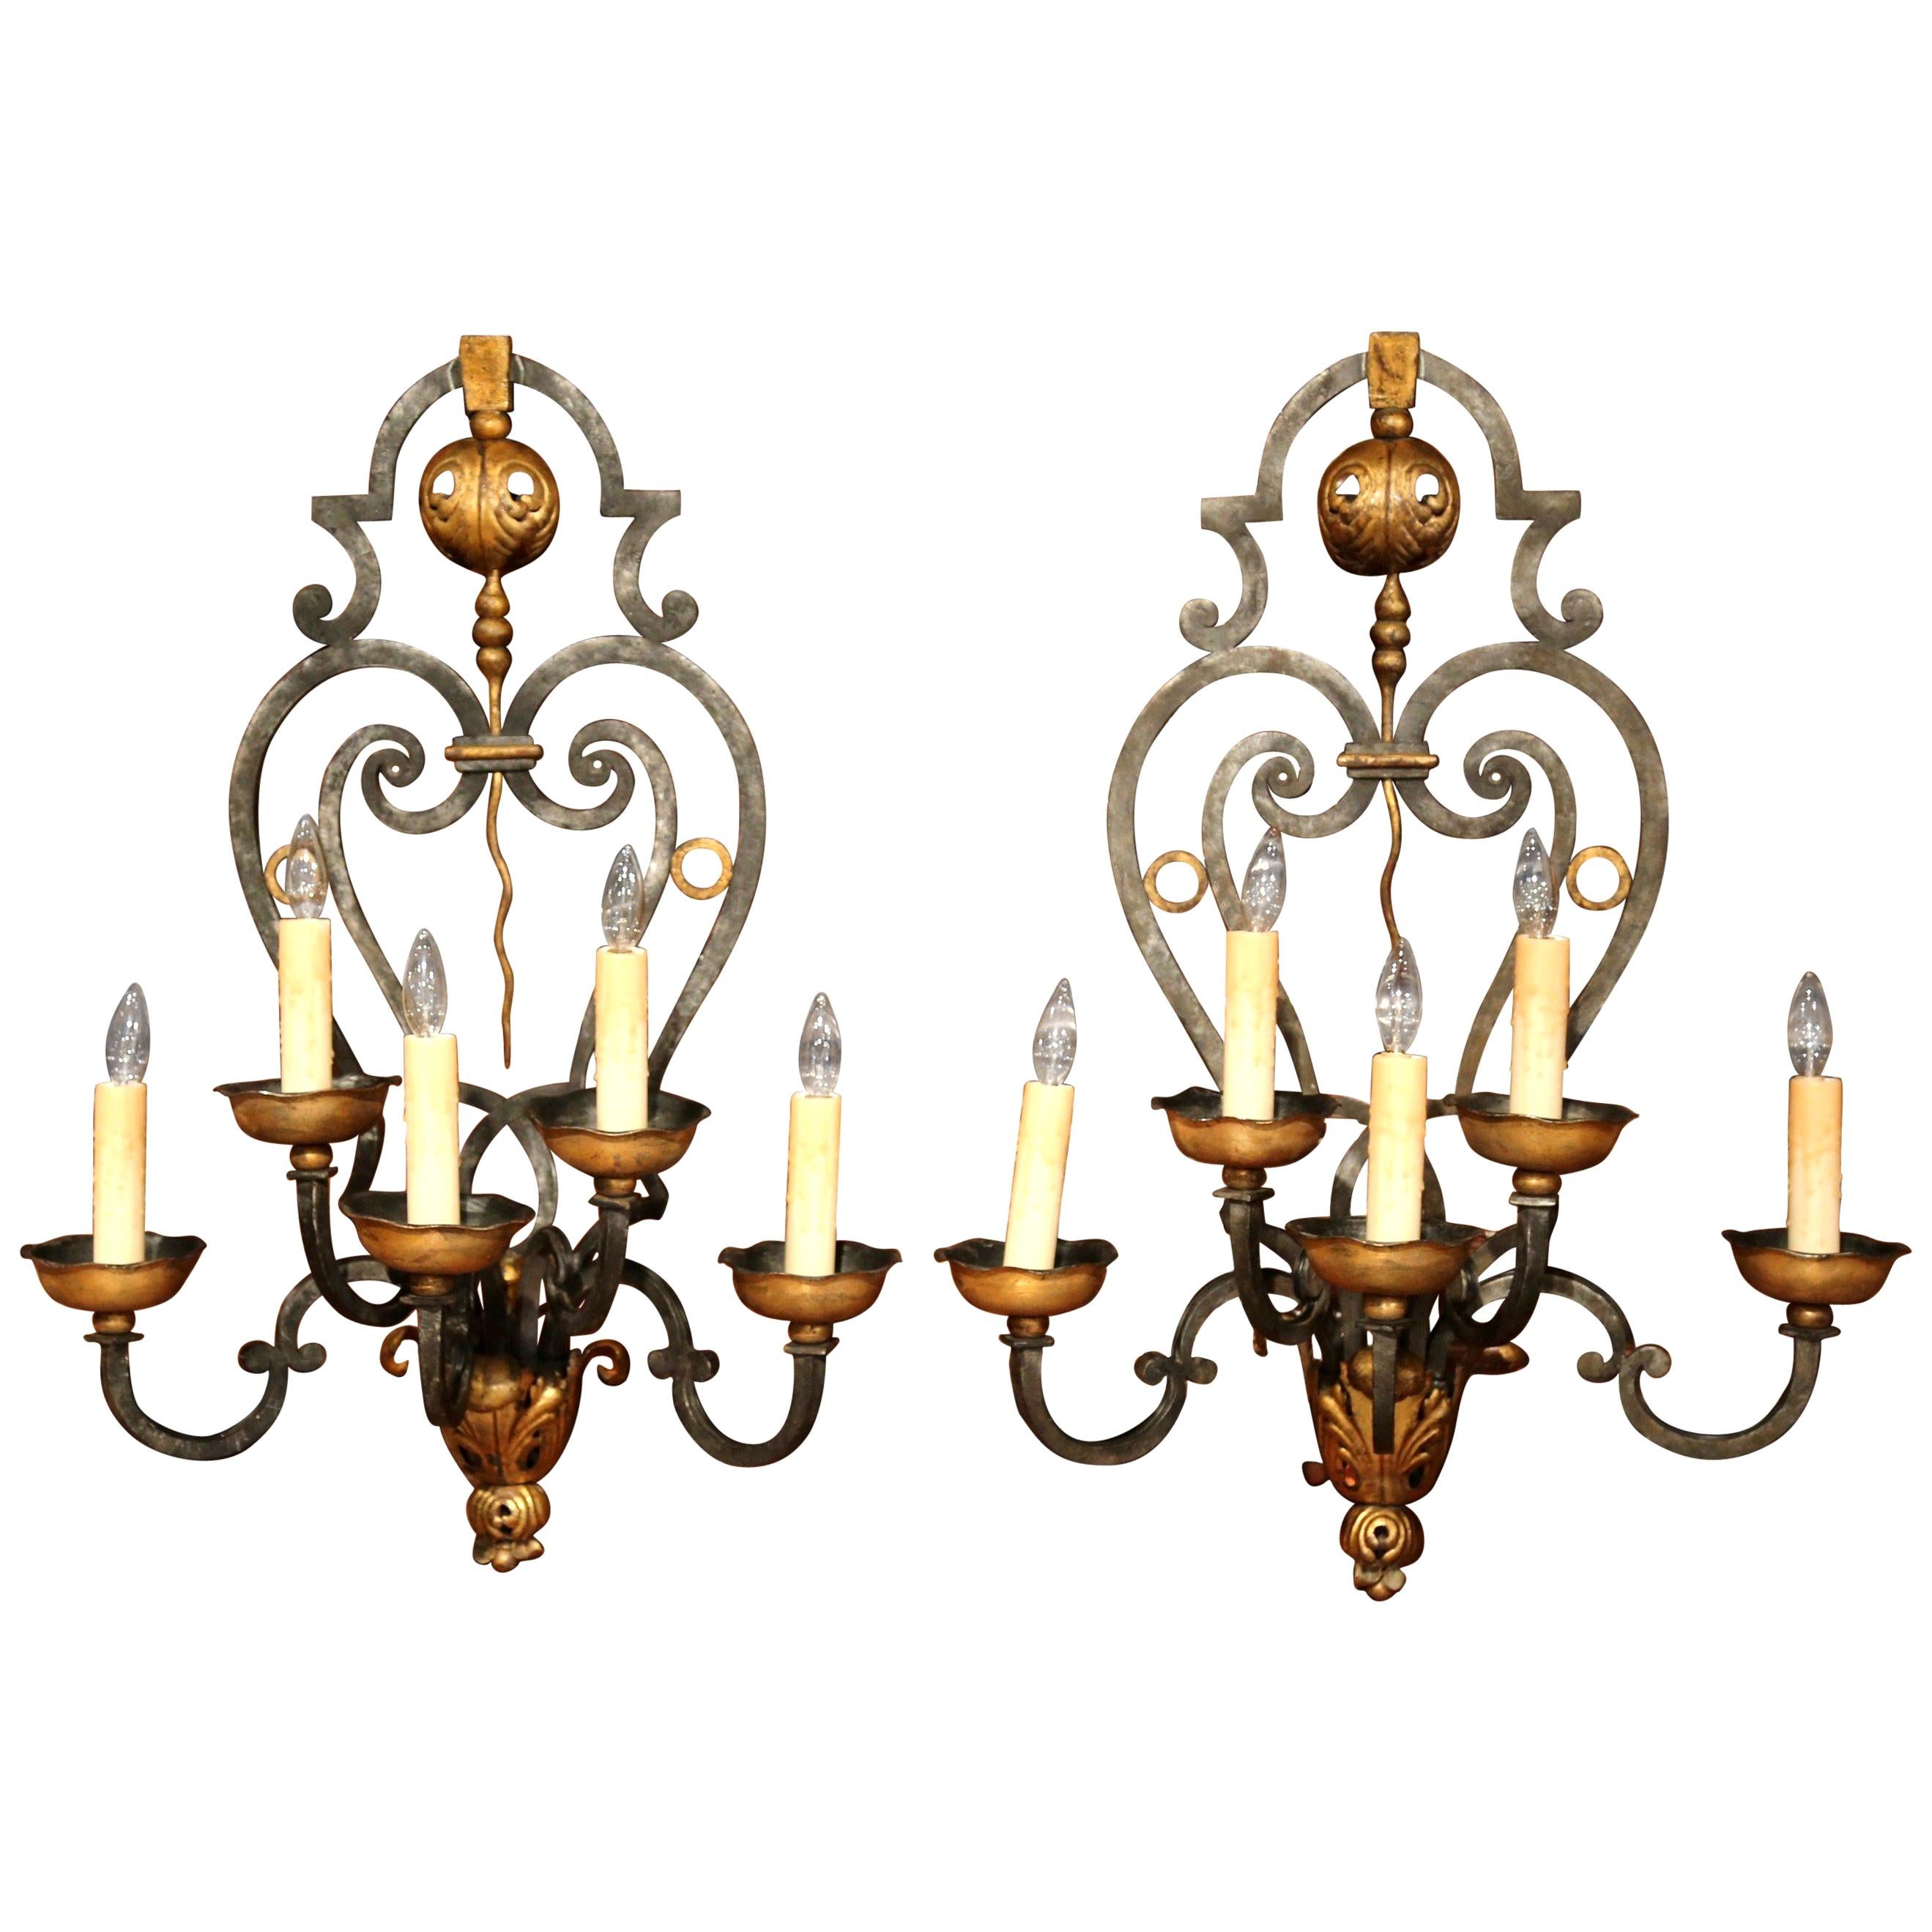 Pair of 19th Century French Louis XV Forged Iron Five-Light Wall Sconces